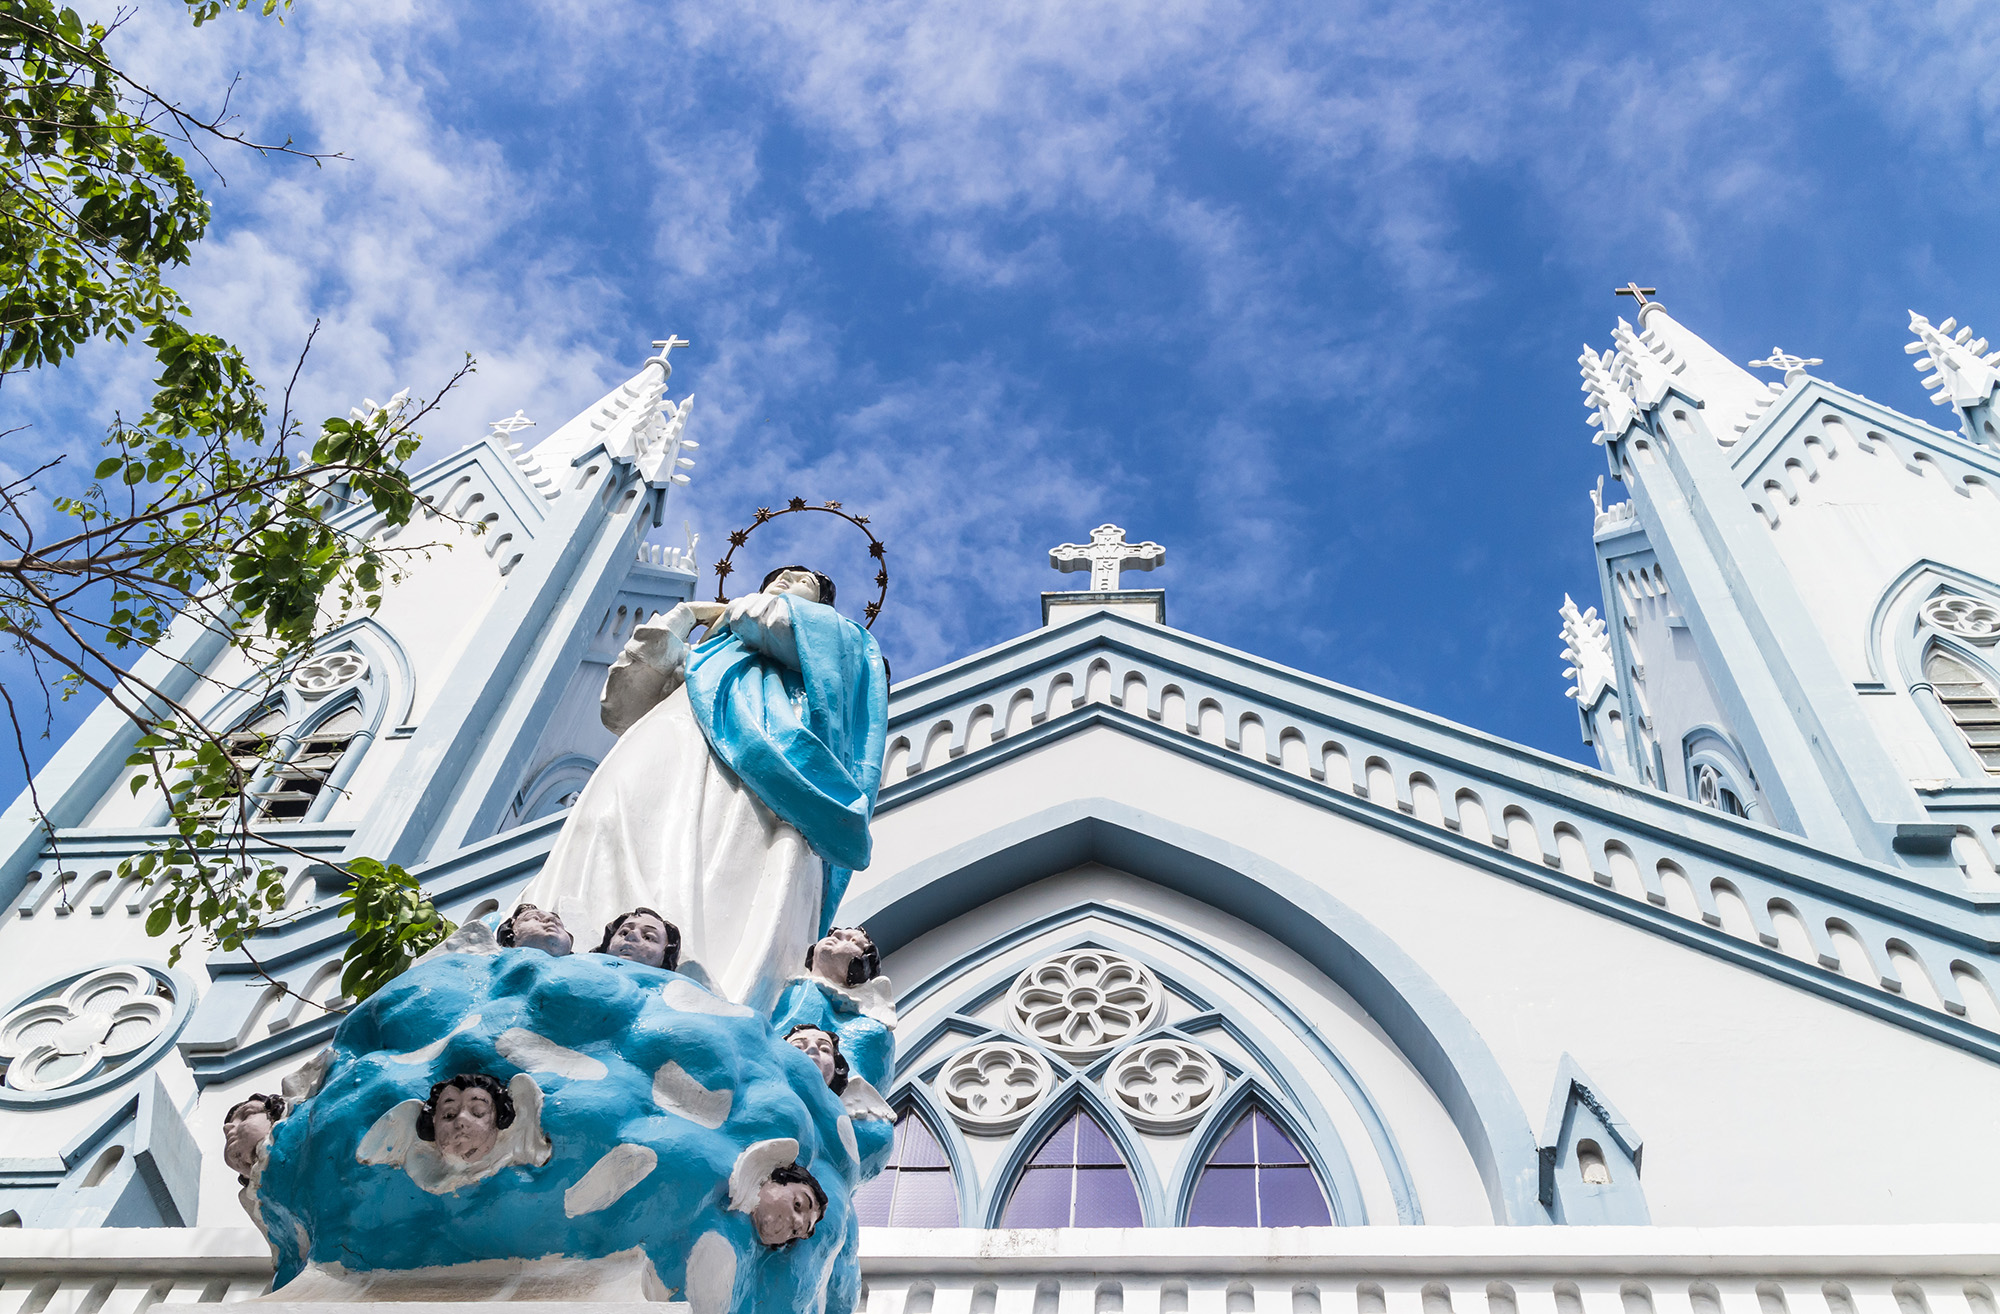 Close up image of the Immaculate Conception Cathedral viewed from below